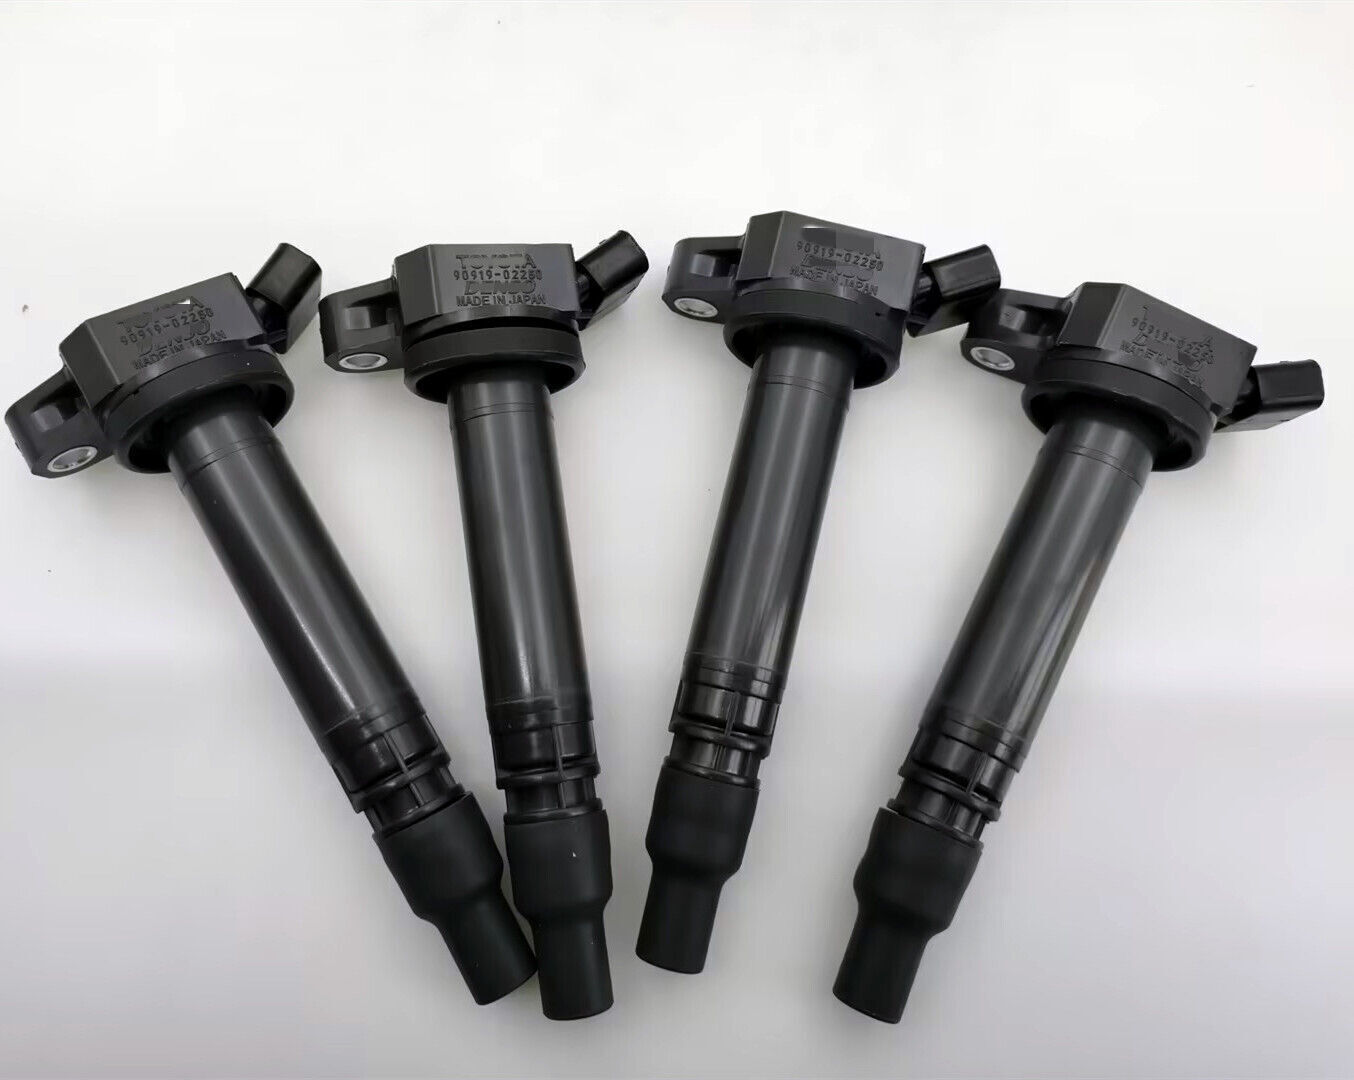 Pack of 4 For DENSO 90919-02250 Ignition Coils for Toyota 07-16 Camry 3.5L IS350